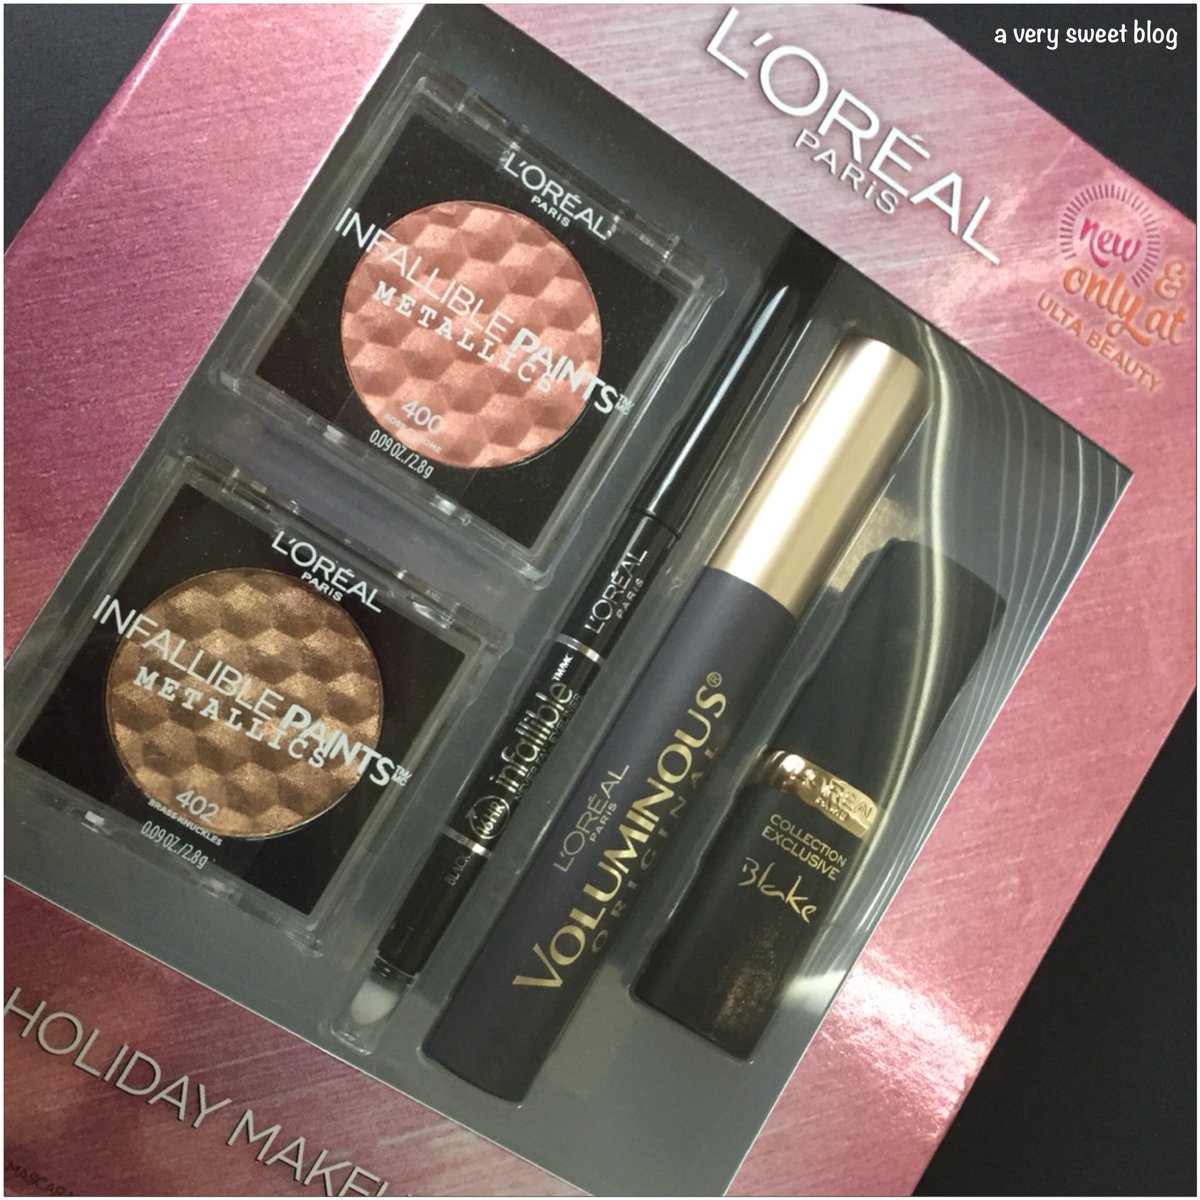 A Very Sweet Blog On Twitter Sponsored New Post L Oreal